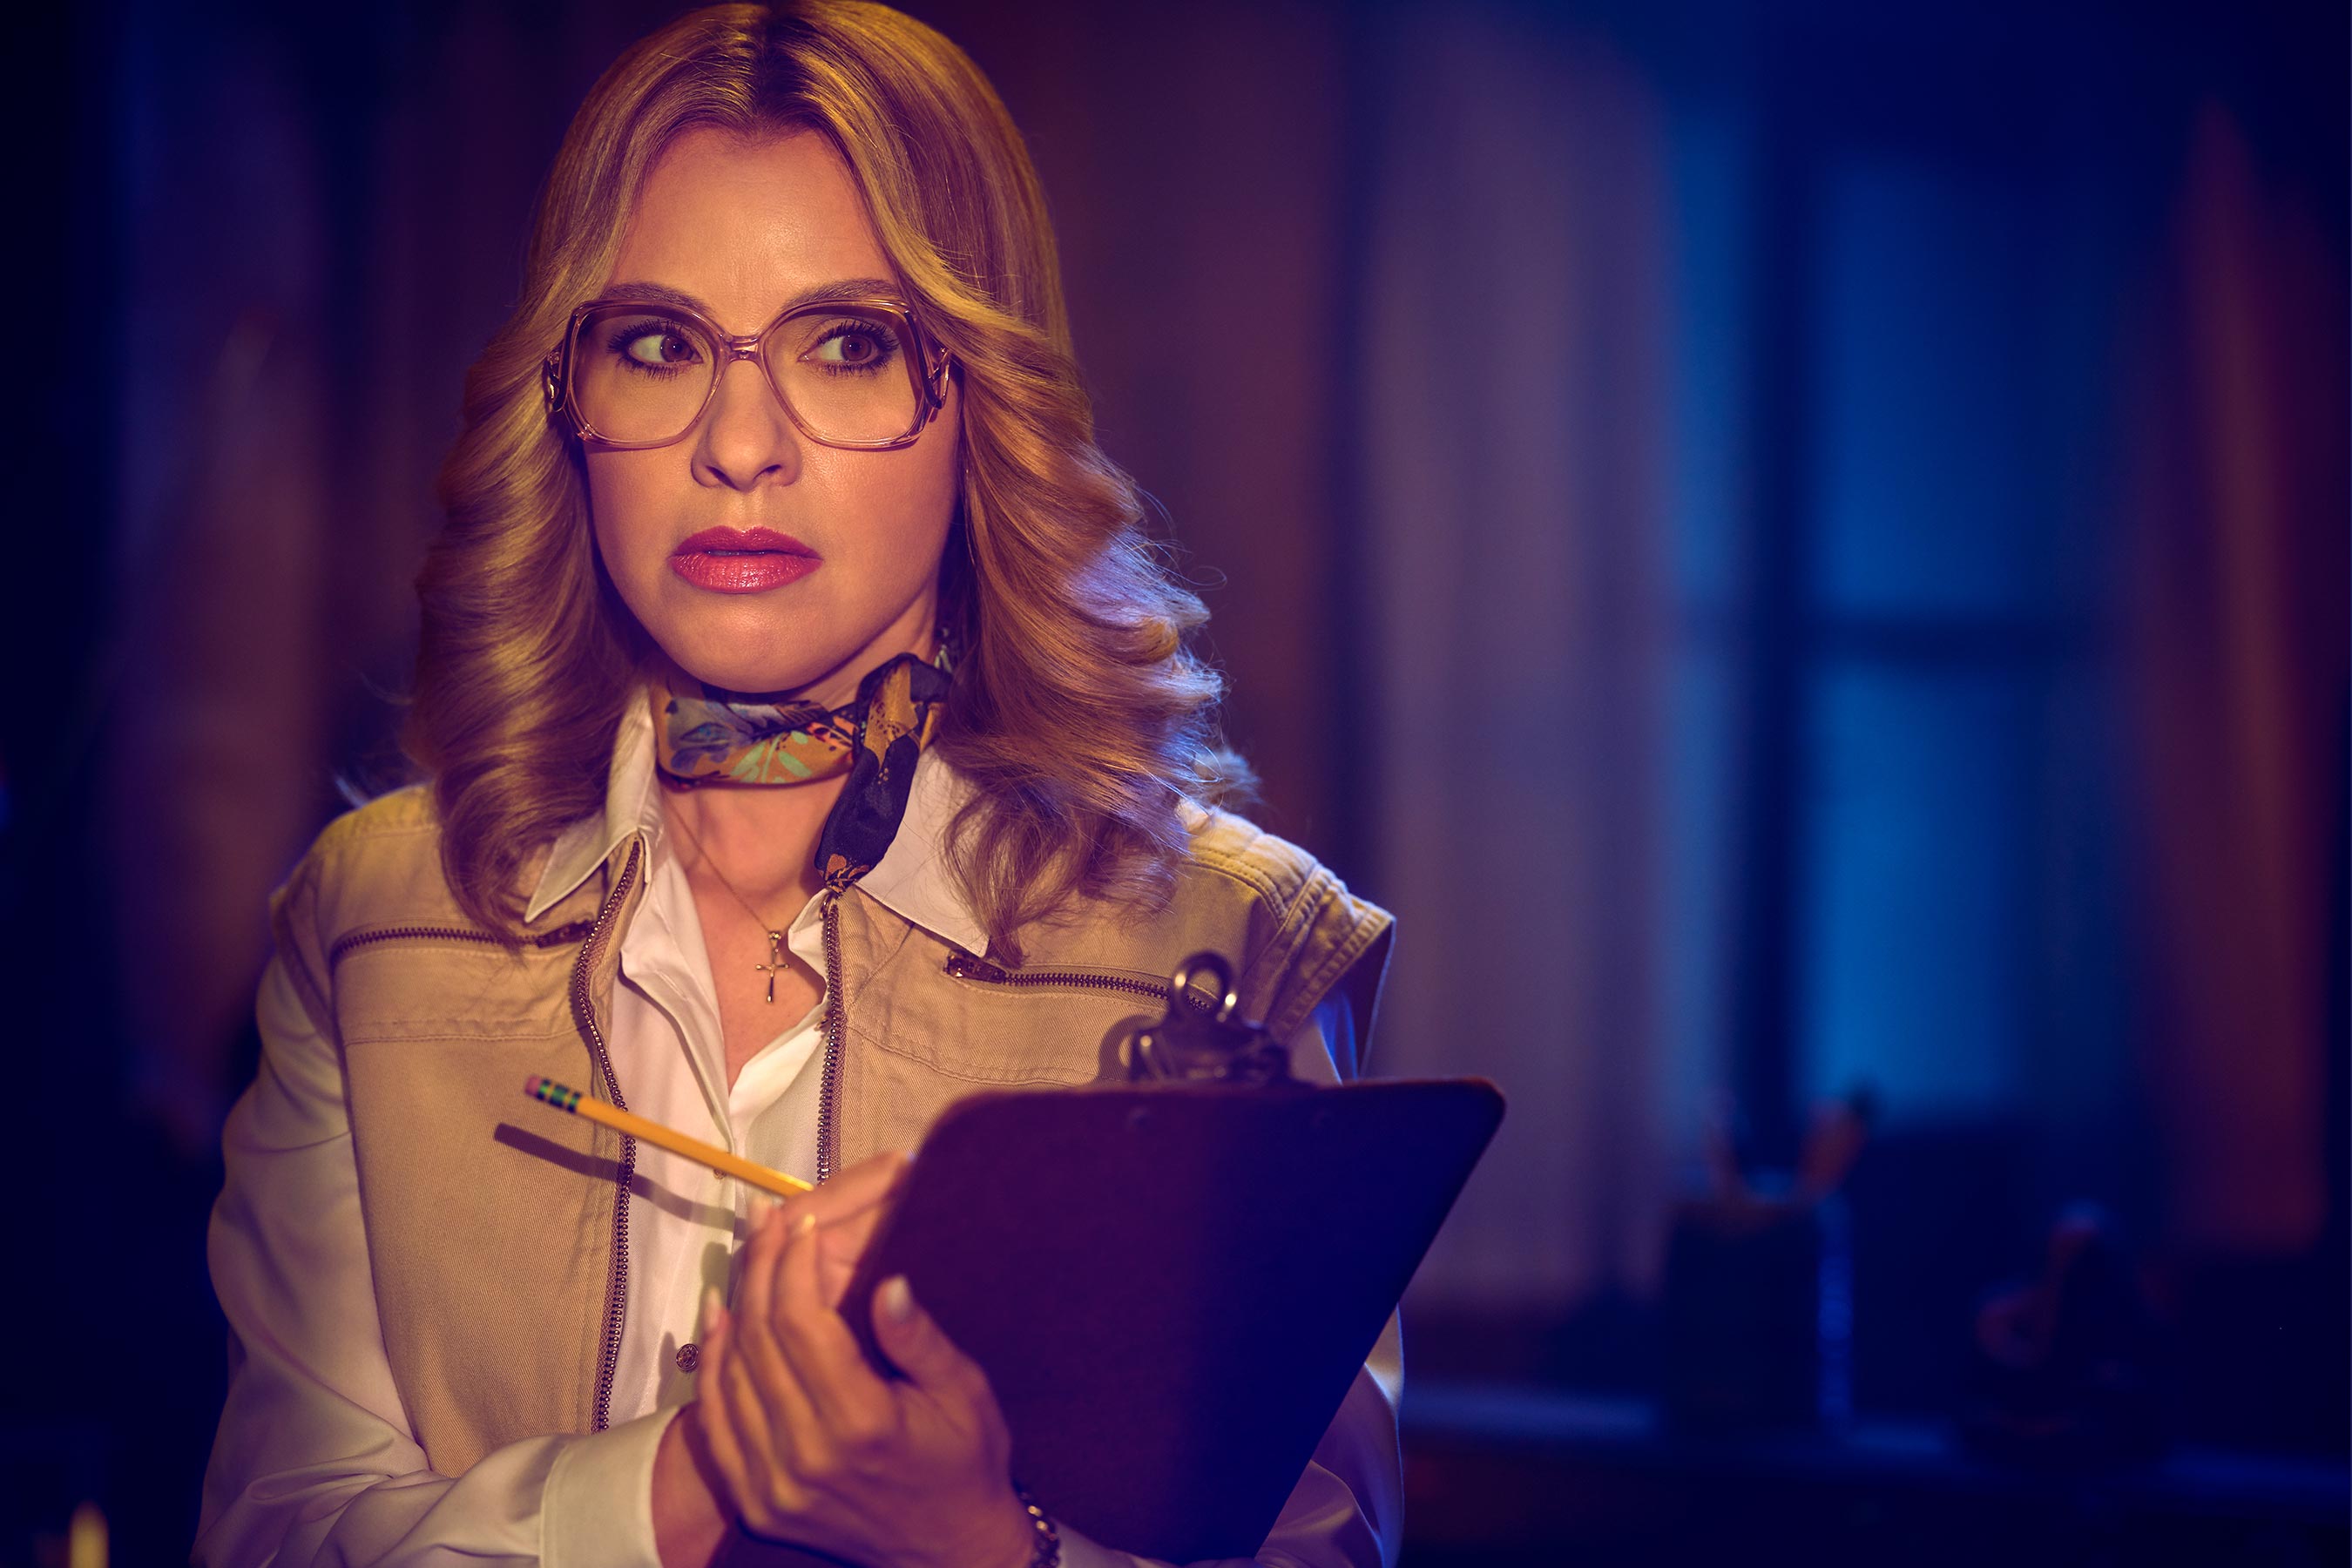 Leslie Grossman on the American Horror Story: 1984 finale and that wood chipper scene